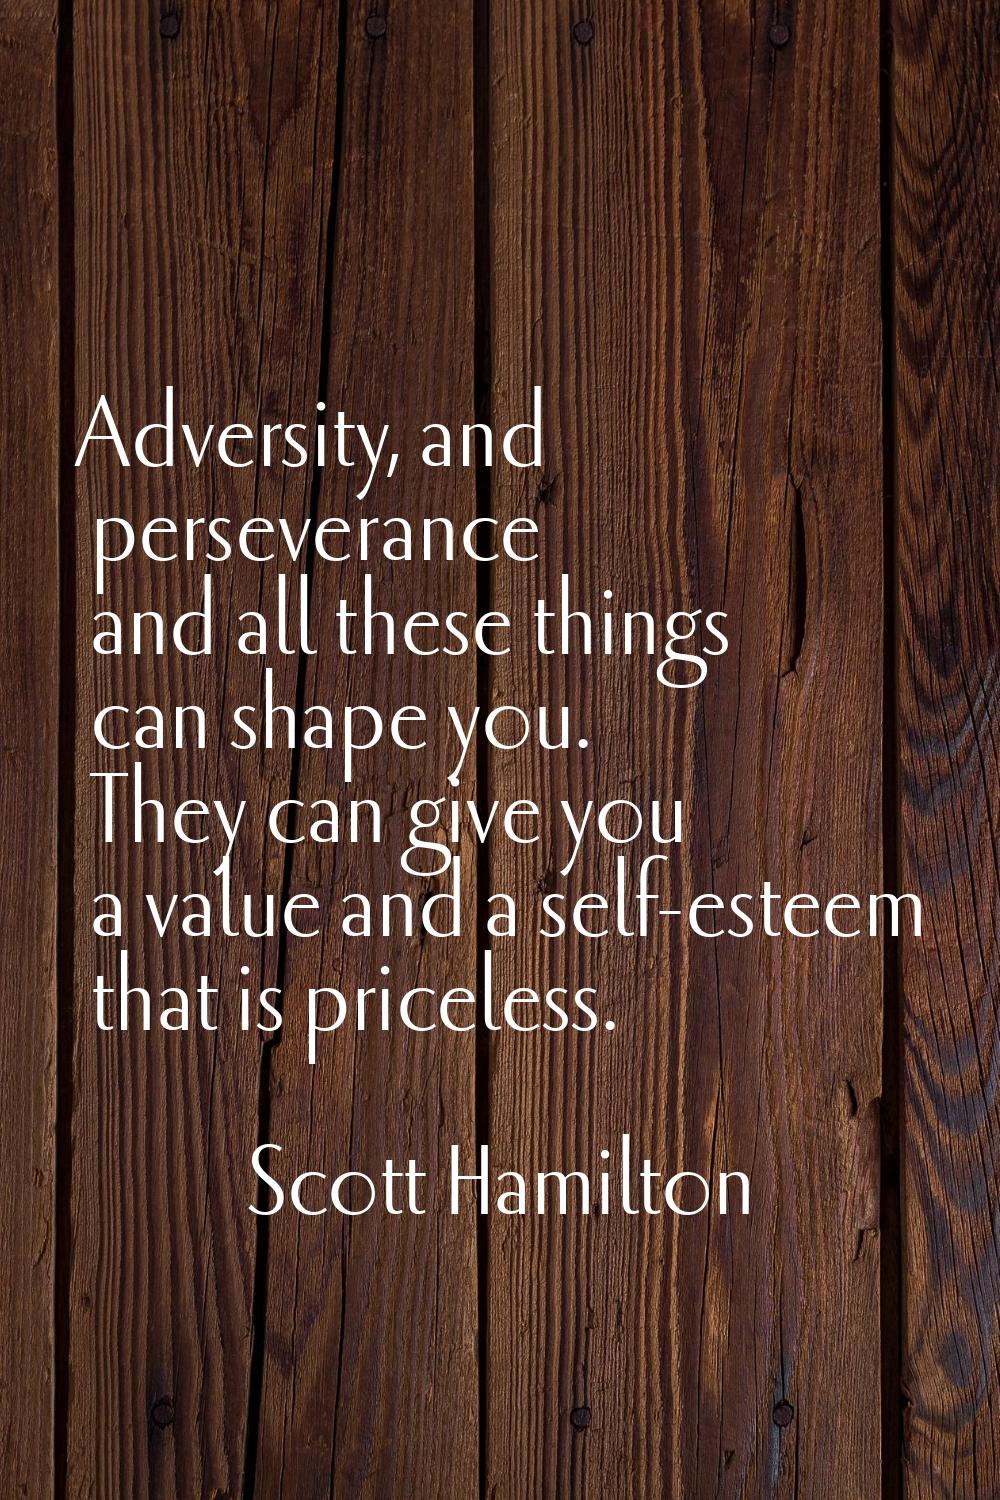 Adversity, and perseverance and all these things can shape you. They can give you a value and a sel